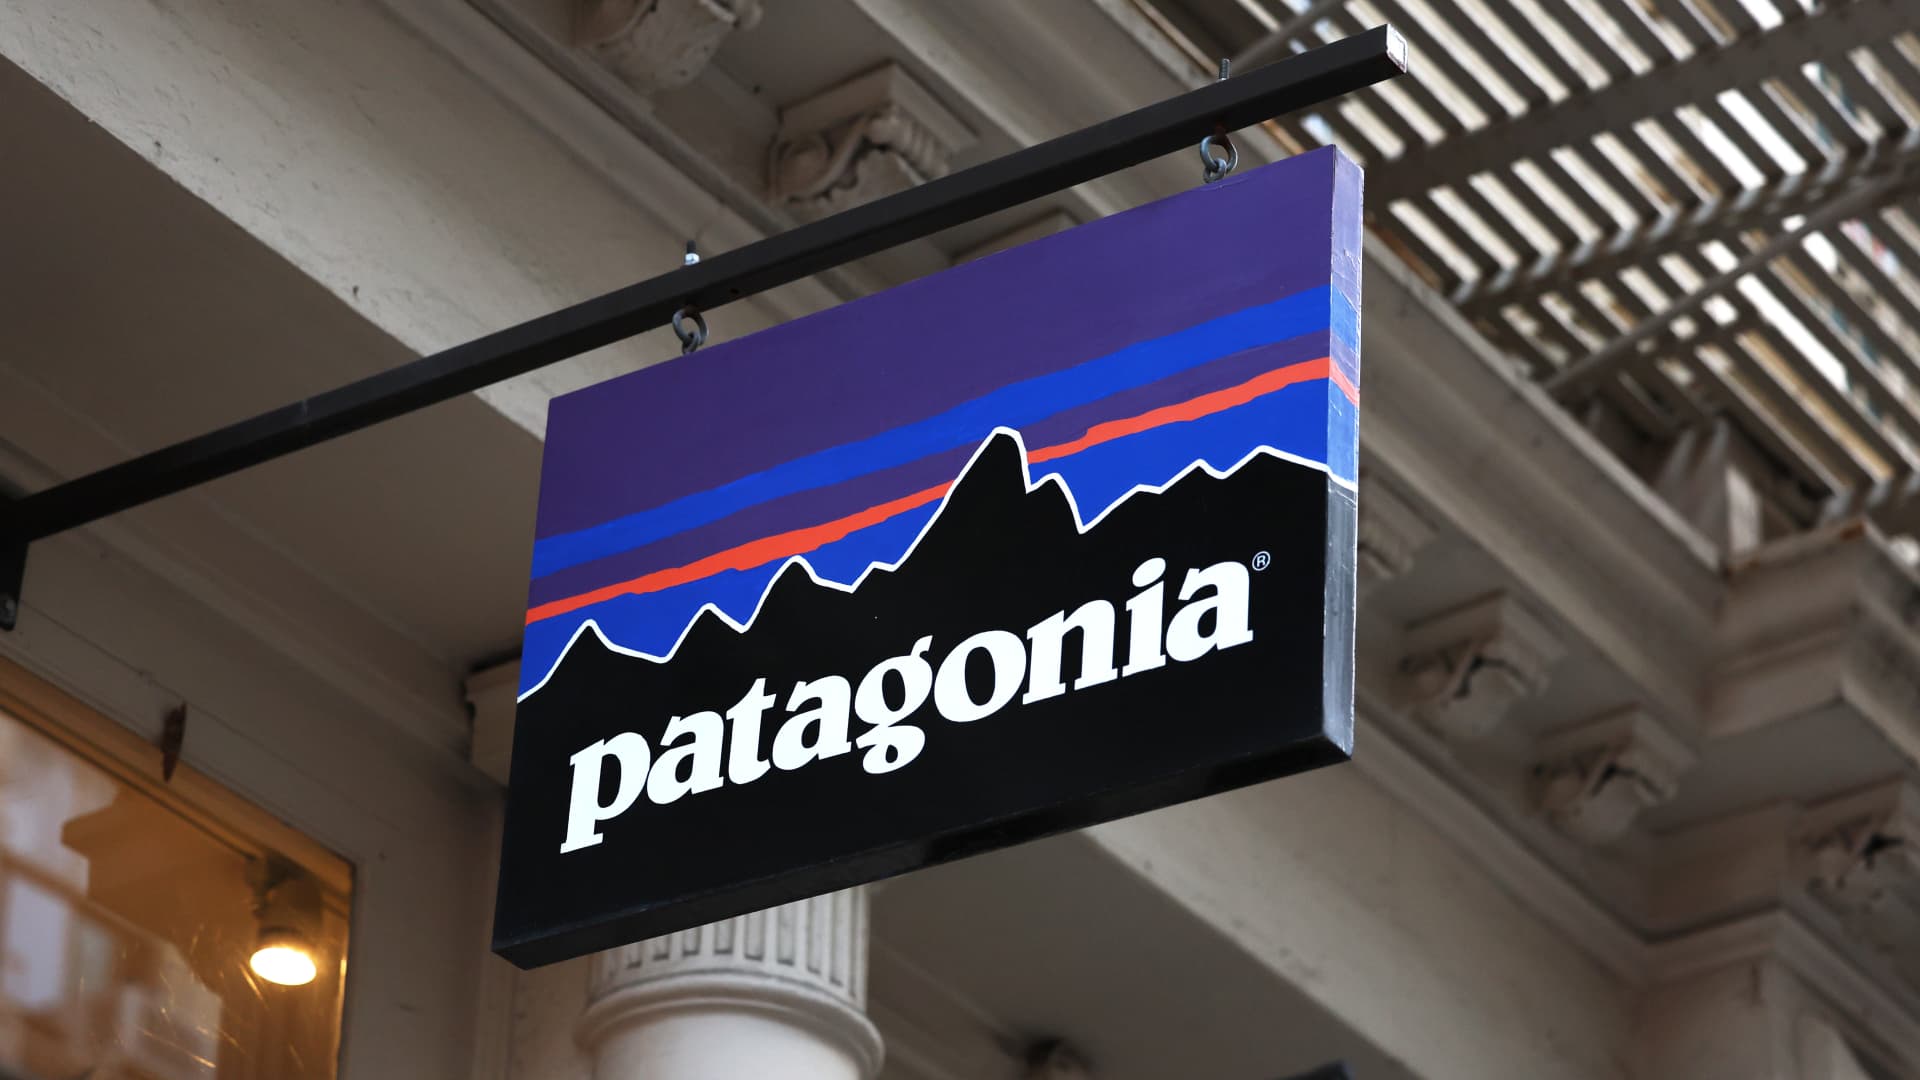 Patagonia’s bold move to donate the entire company to fight climate change only works if it stays competitive in business, CEO says